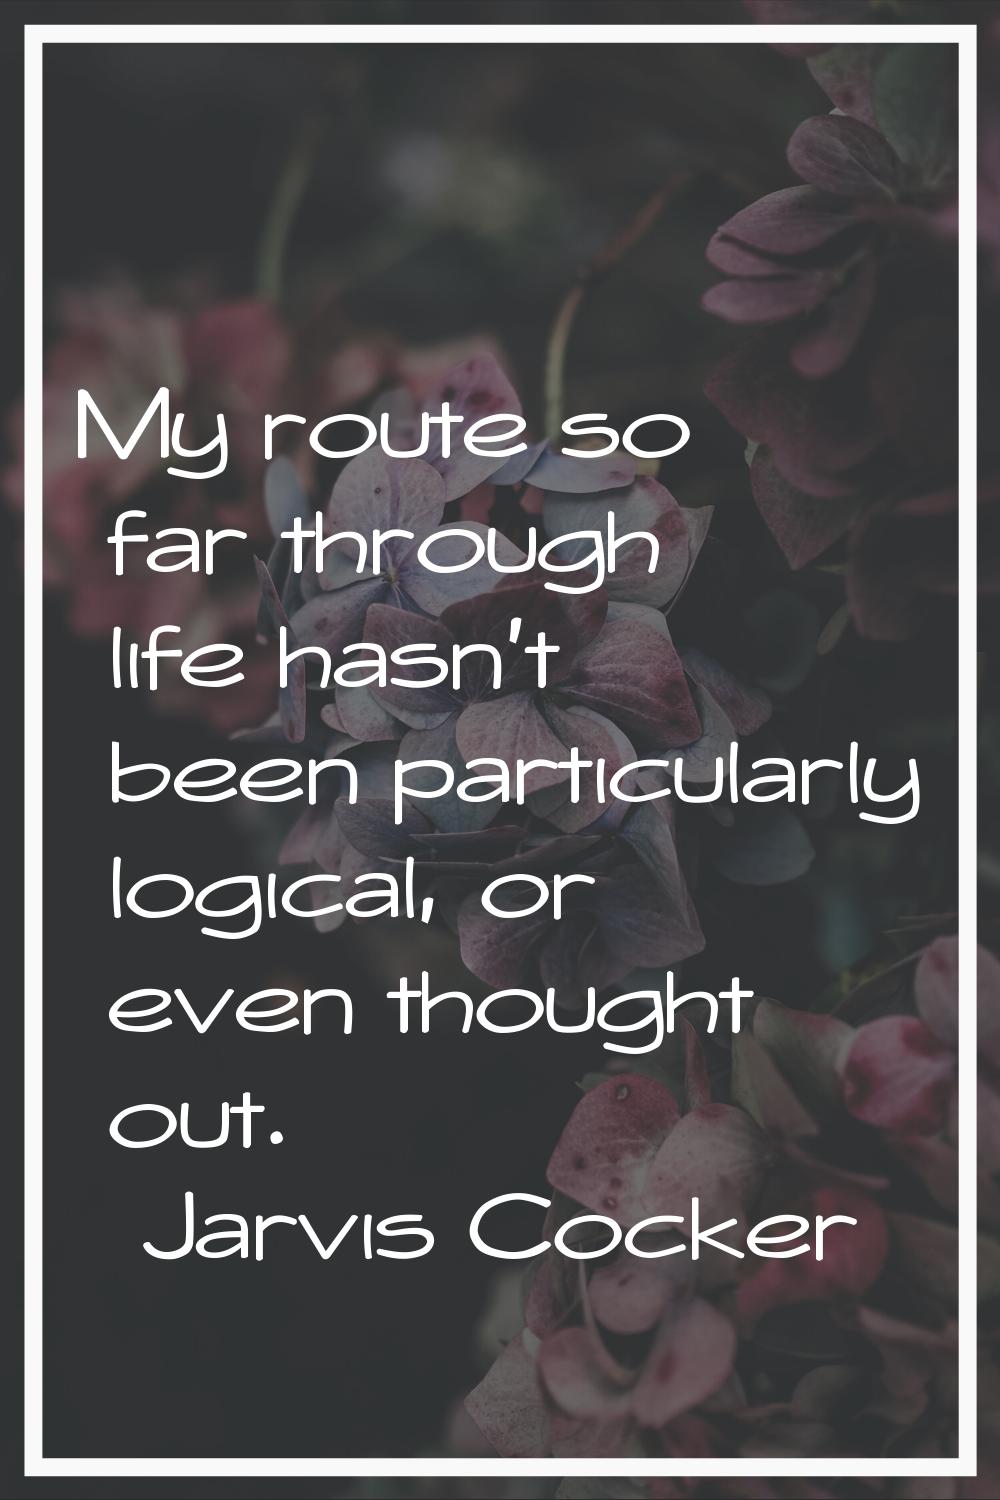 My route so far through life hasn't been particularly logical, or even thought out.